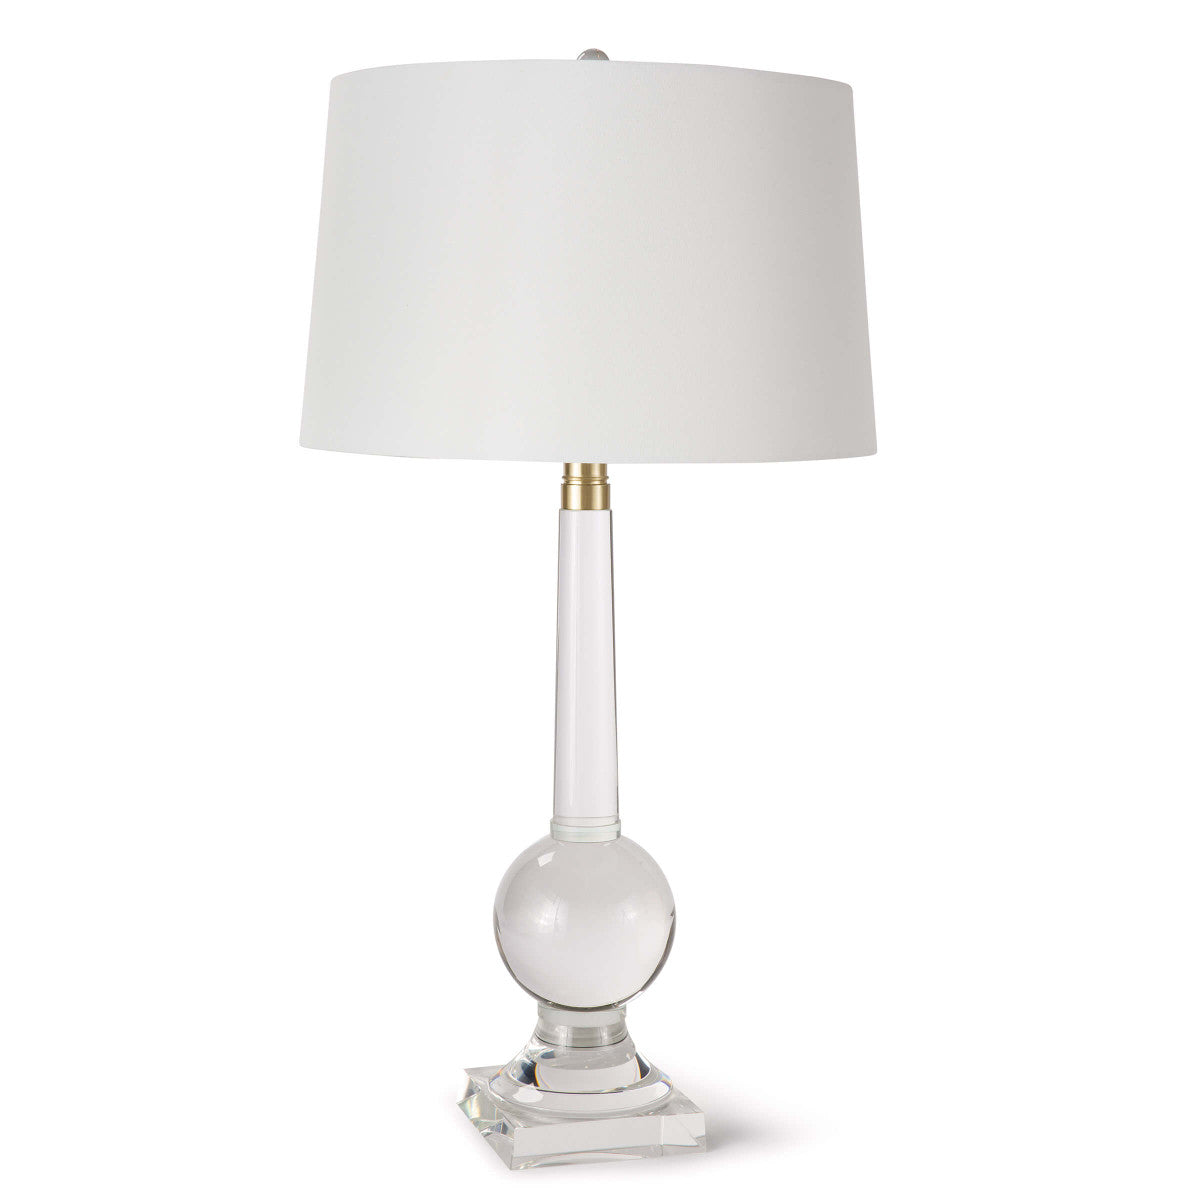 Regina Andrew - 13-1327 - One Light Table Lamp - Stowe - Clear